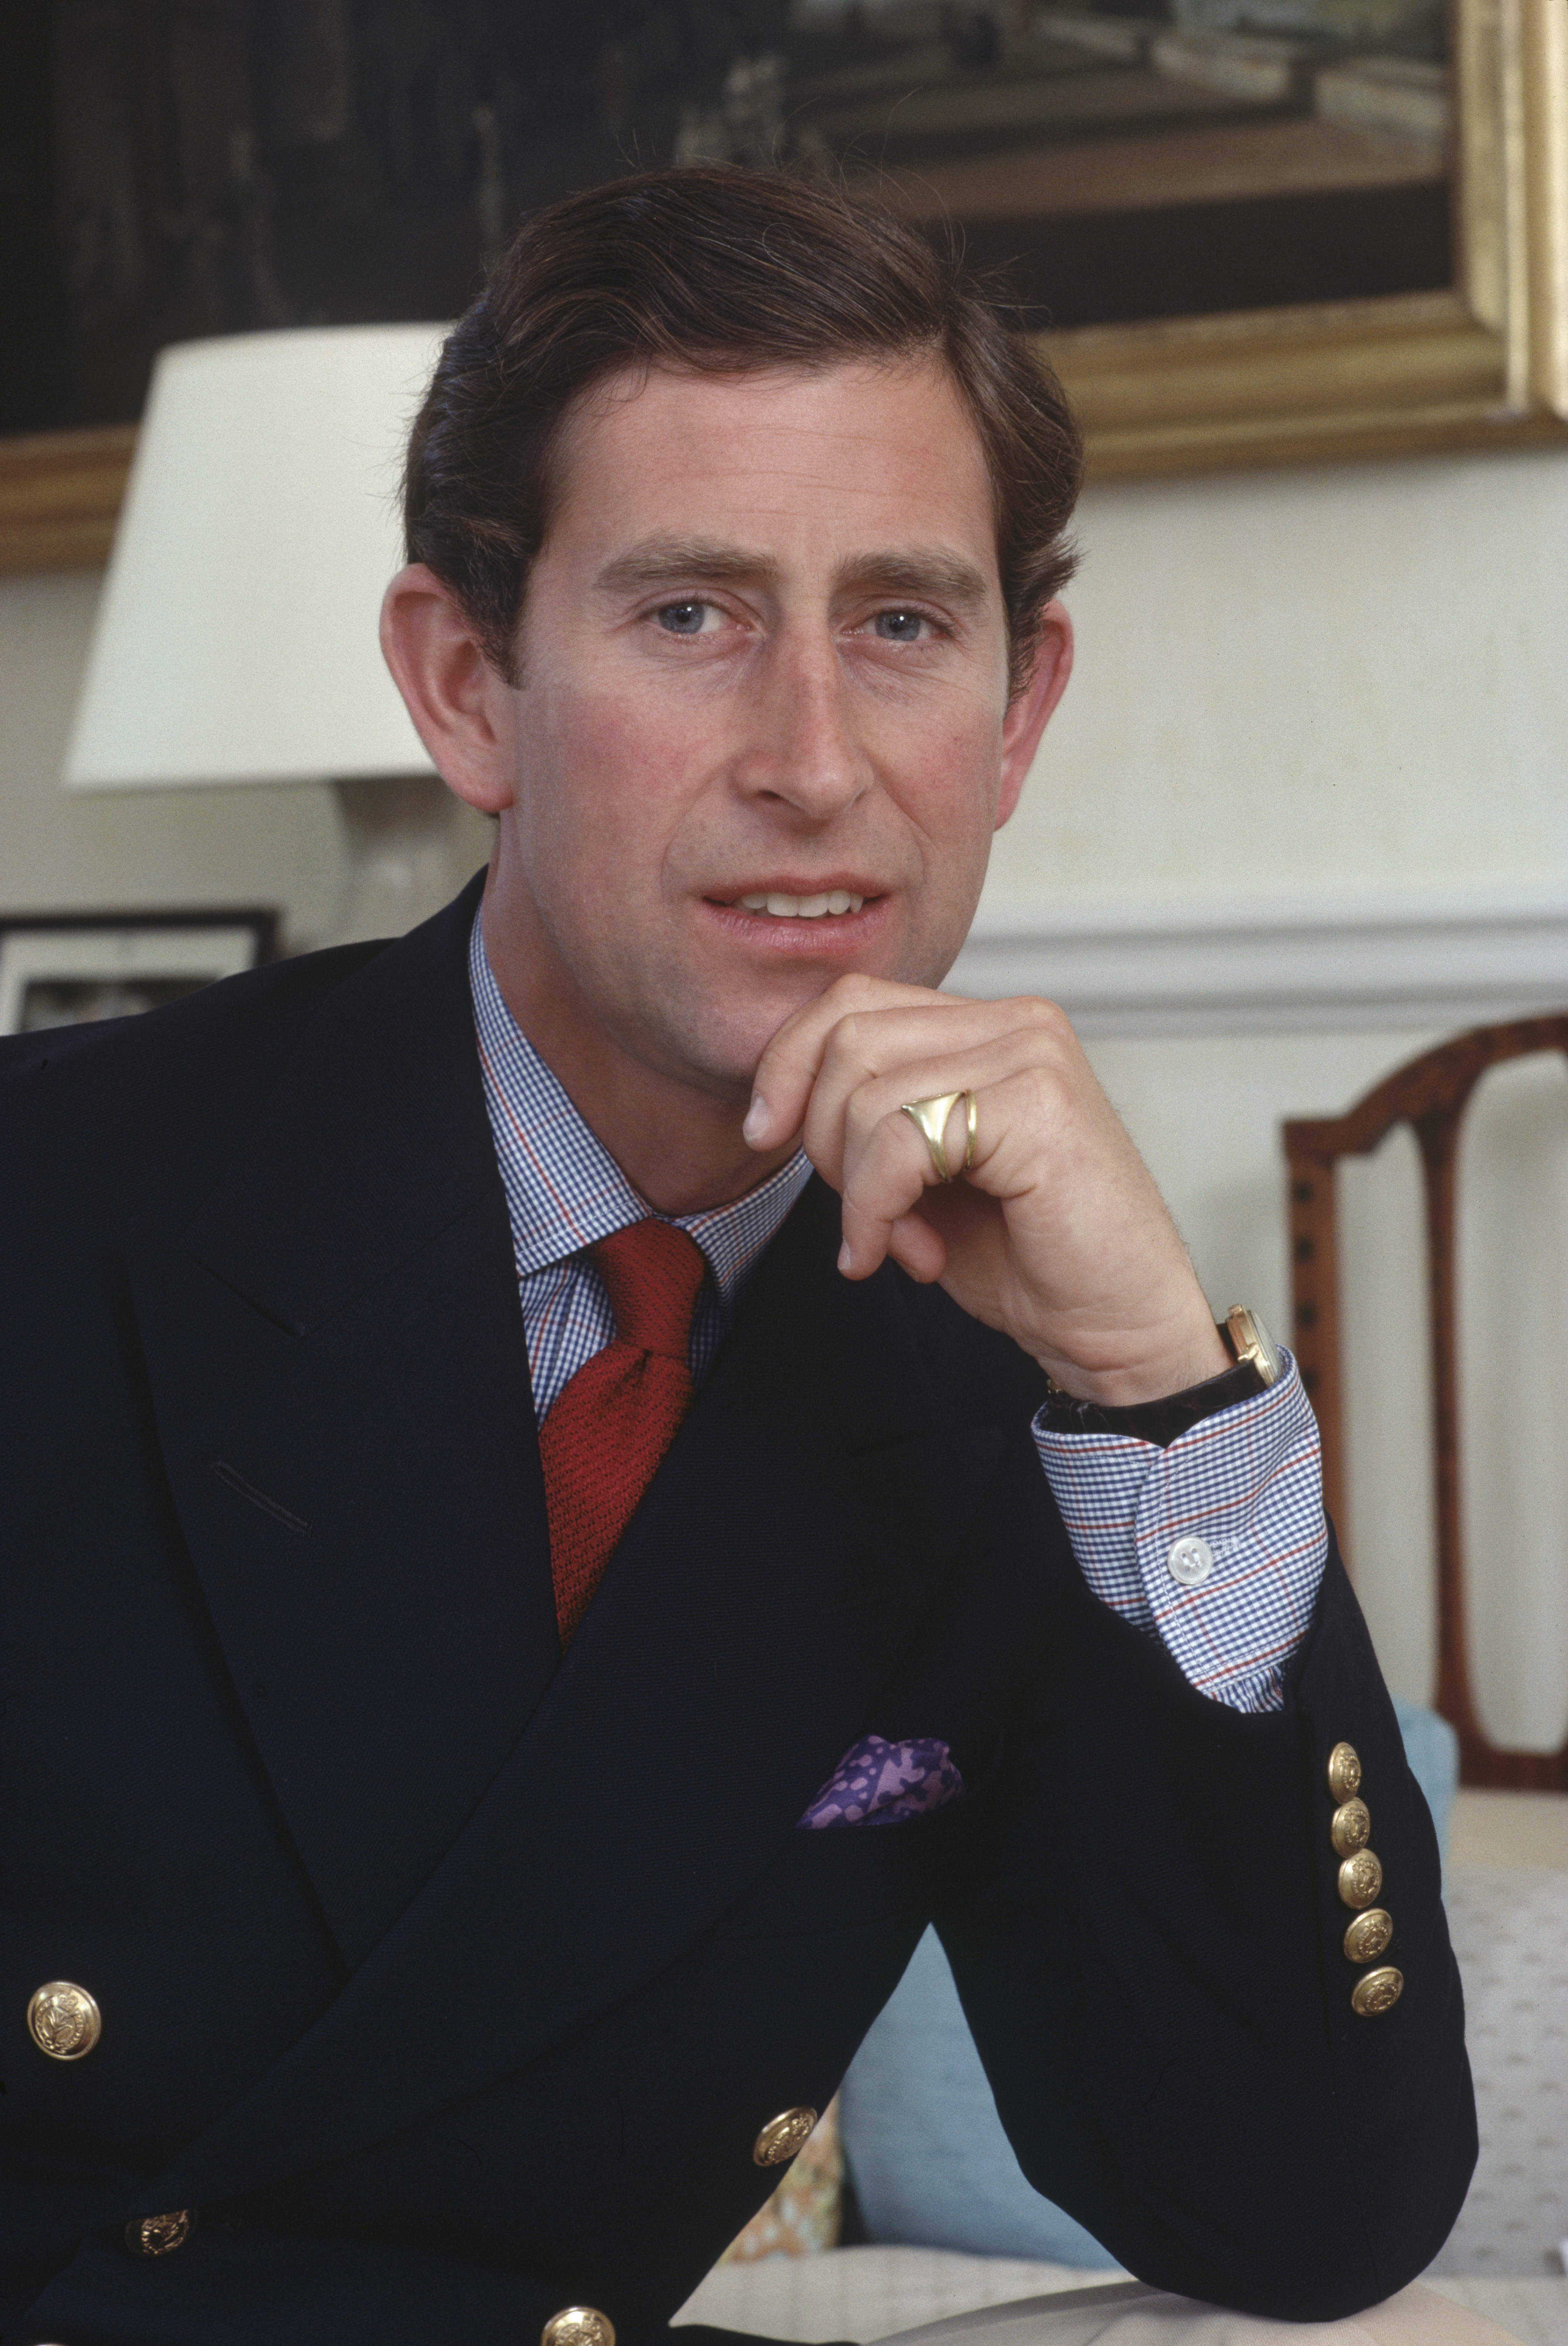 Prince Charles at Highgrove House in Doughton, Gloucestershire on August 11, 1982 | Source: Getty Images